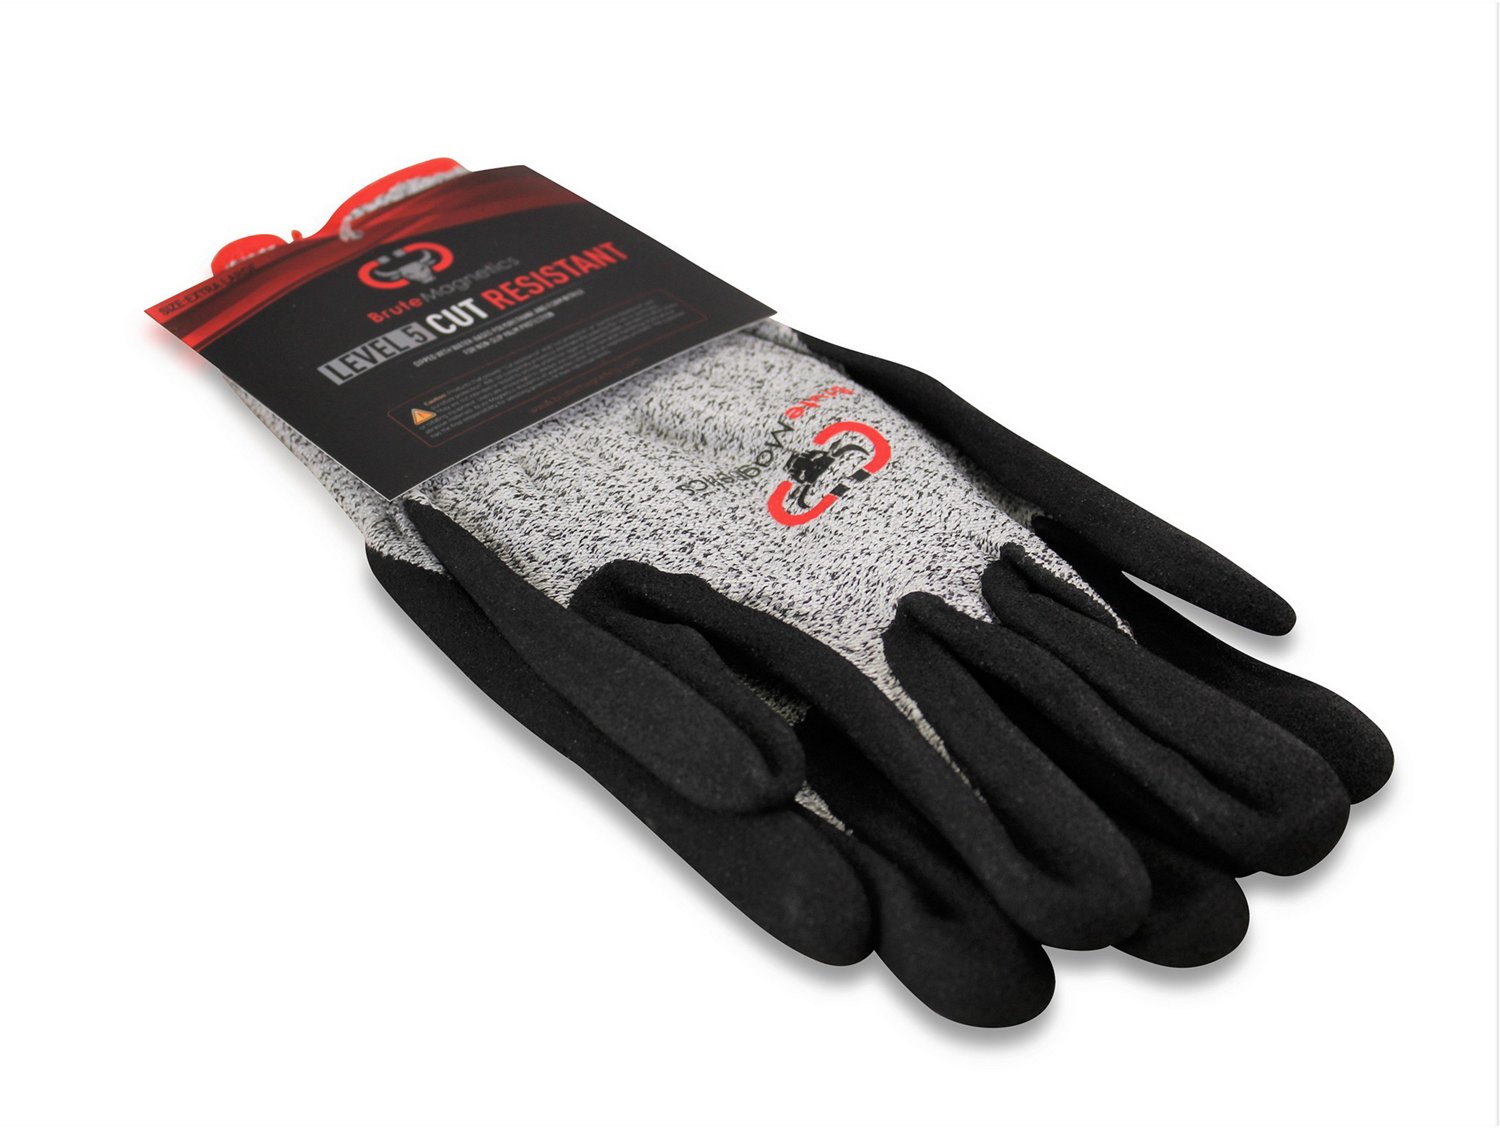 Unisex Adults Water Resistant Fishing Gloves for sale